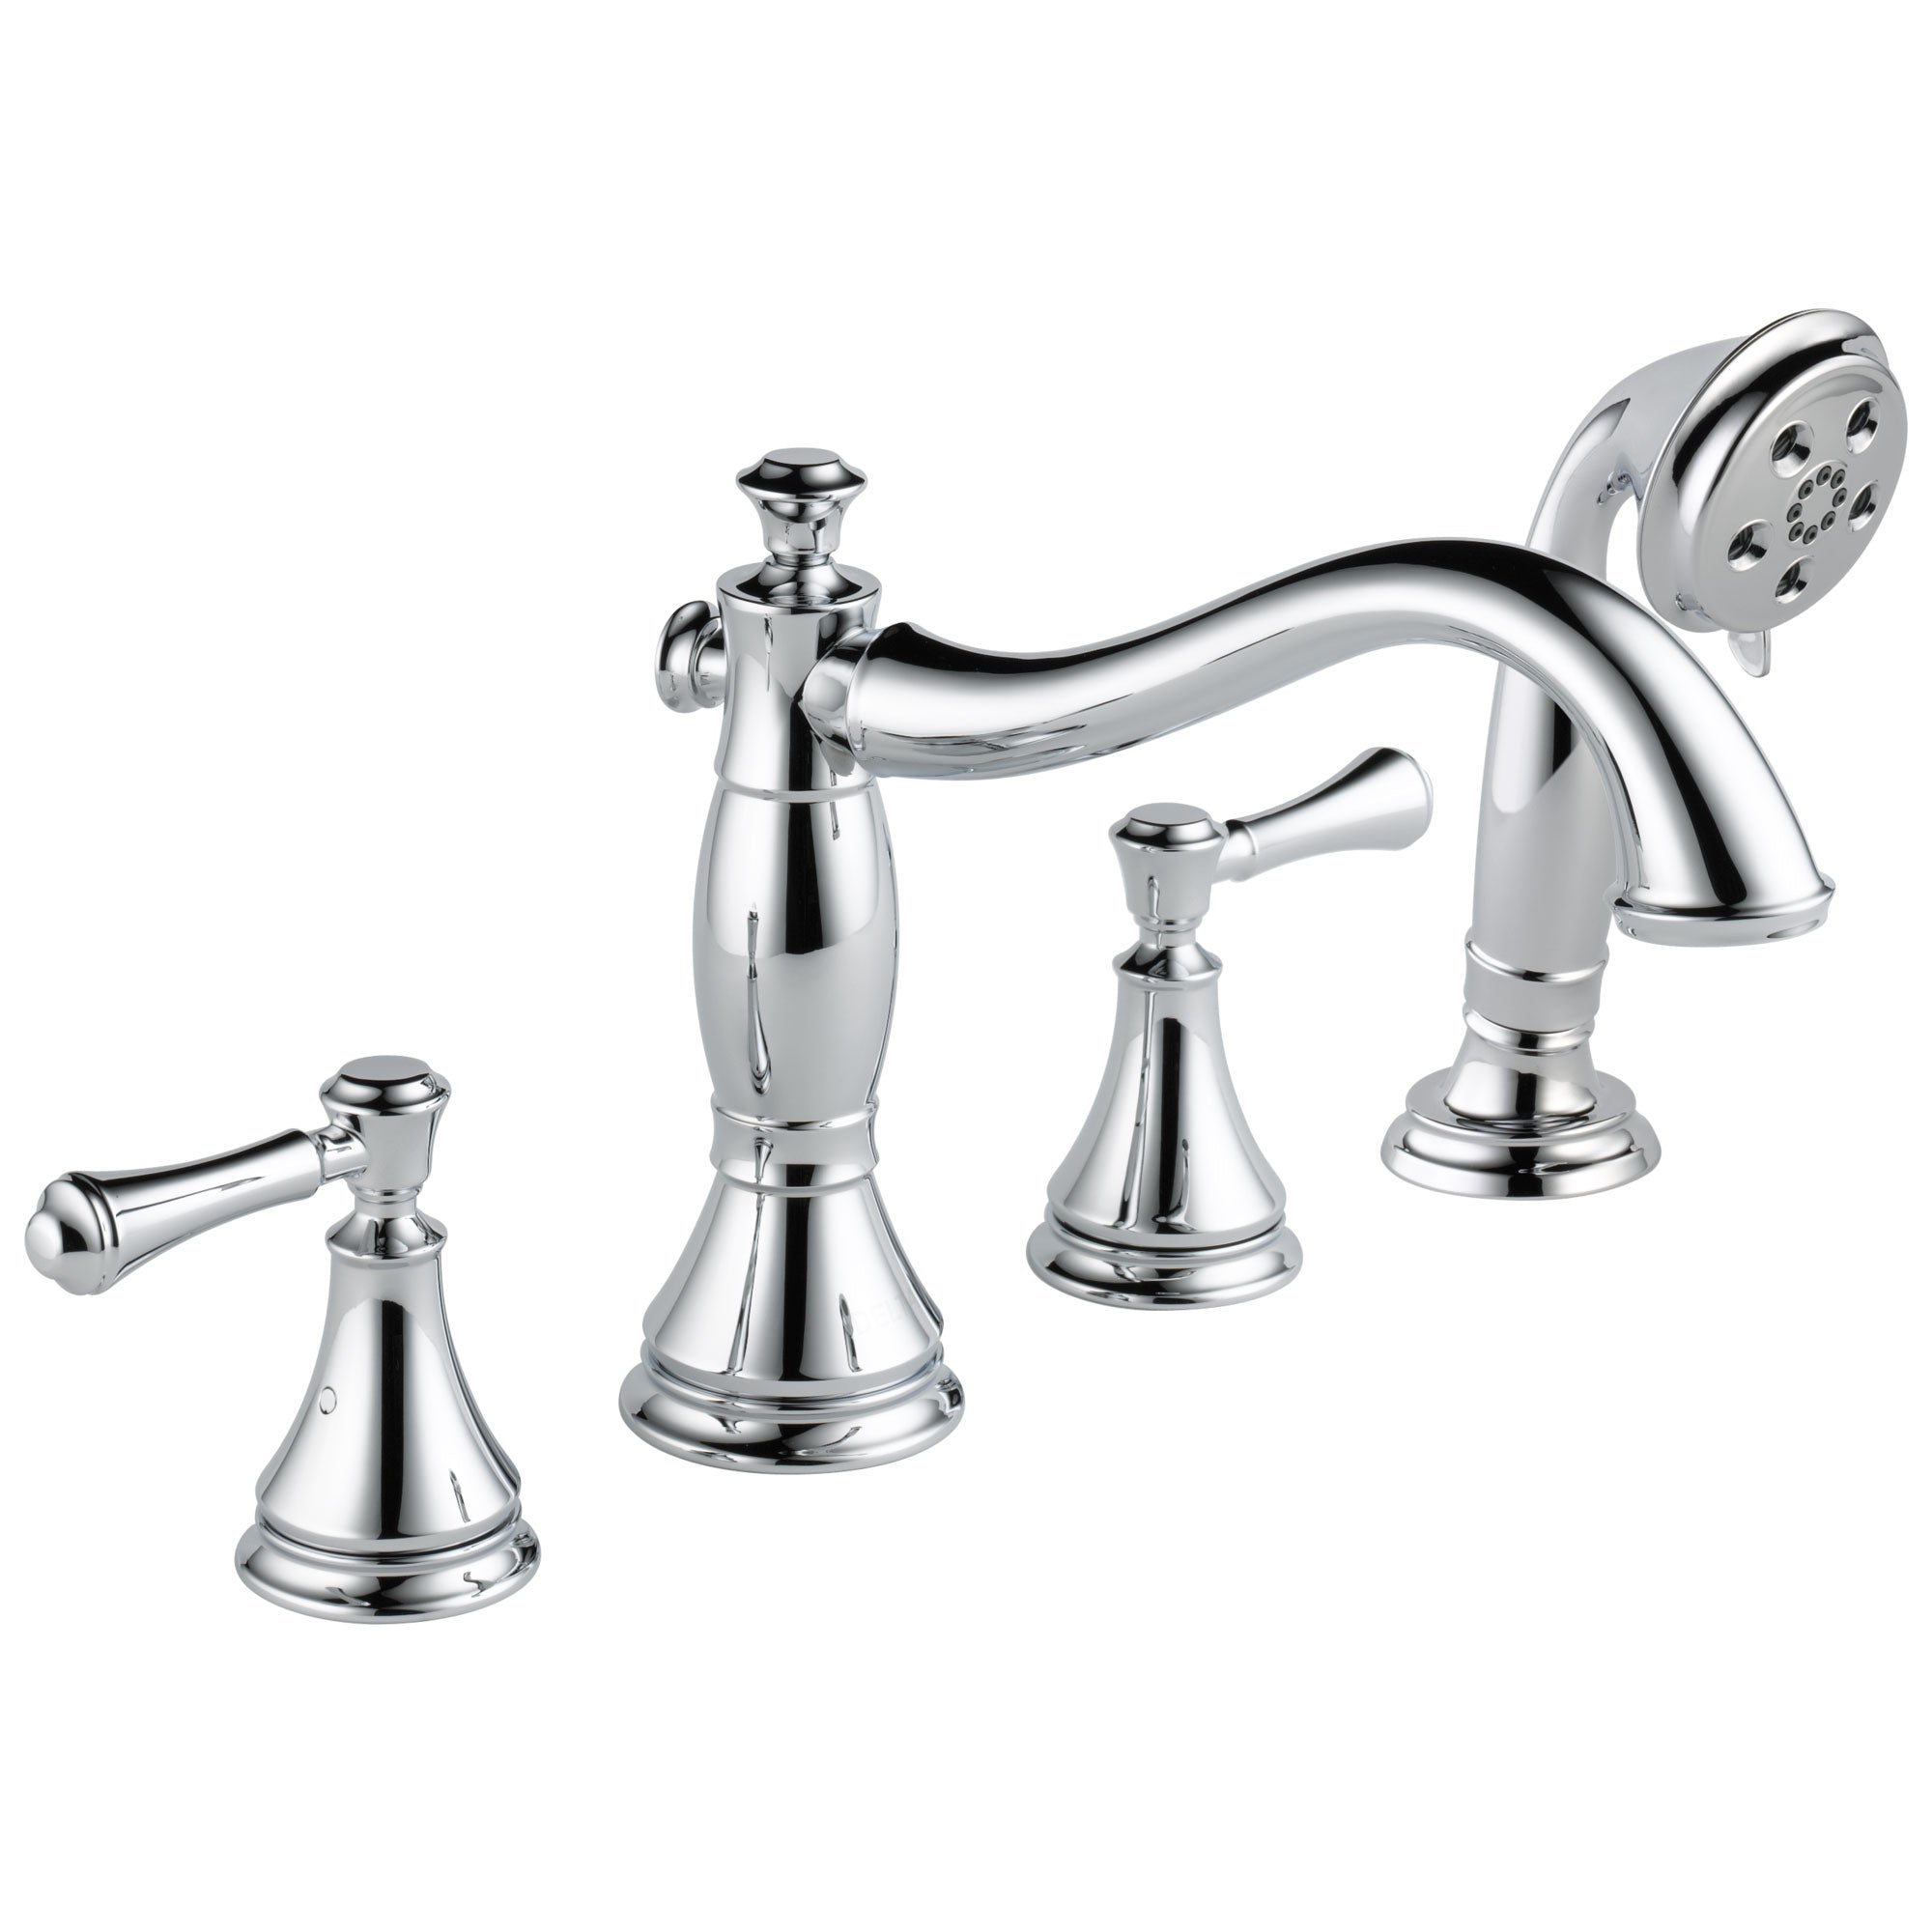 Delta Cassidy Collection Chrome Finish Roman Tub Filler Faucet with Hand Shower INCLUDES (2) Lever Handles and Rough-in Valve D1401V